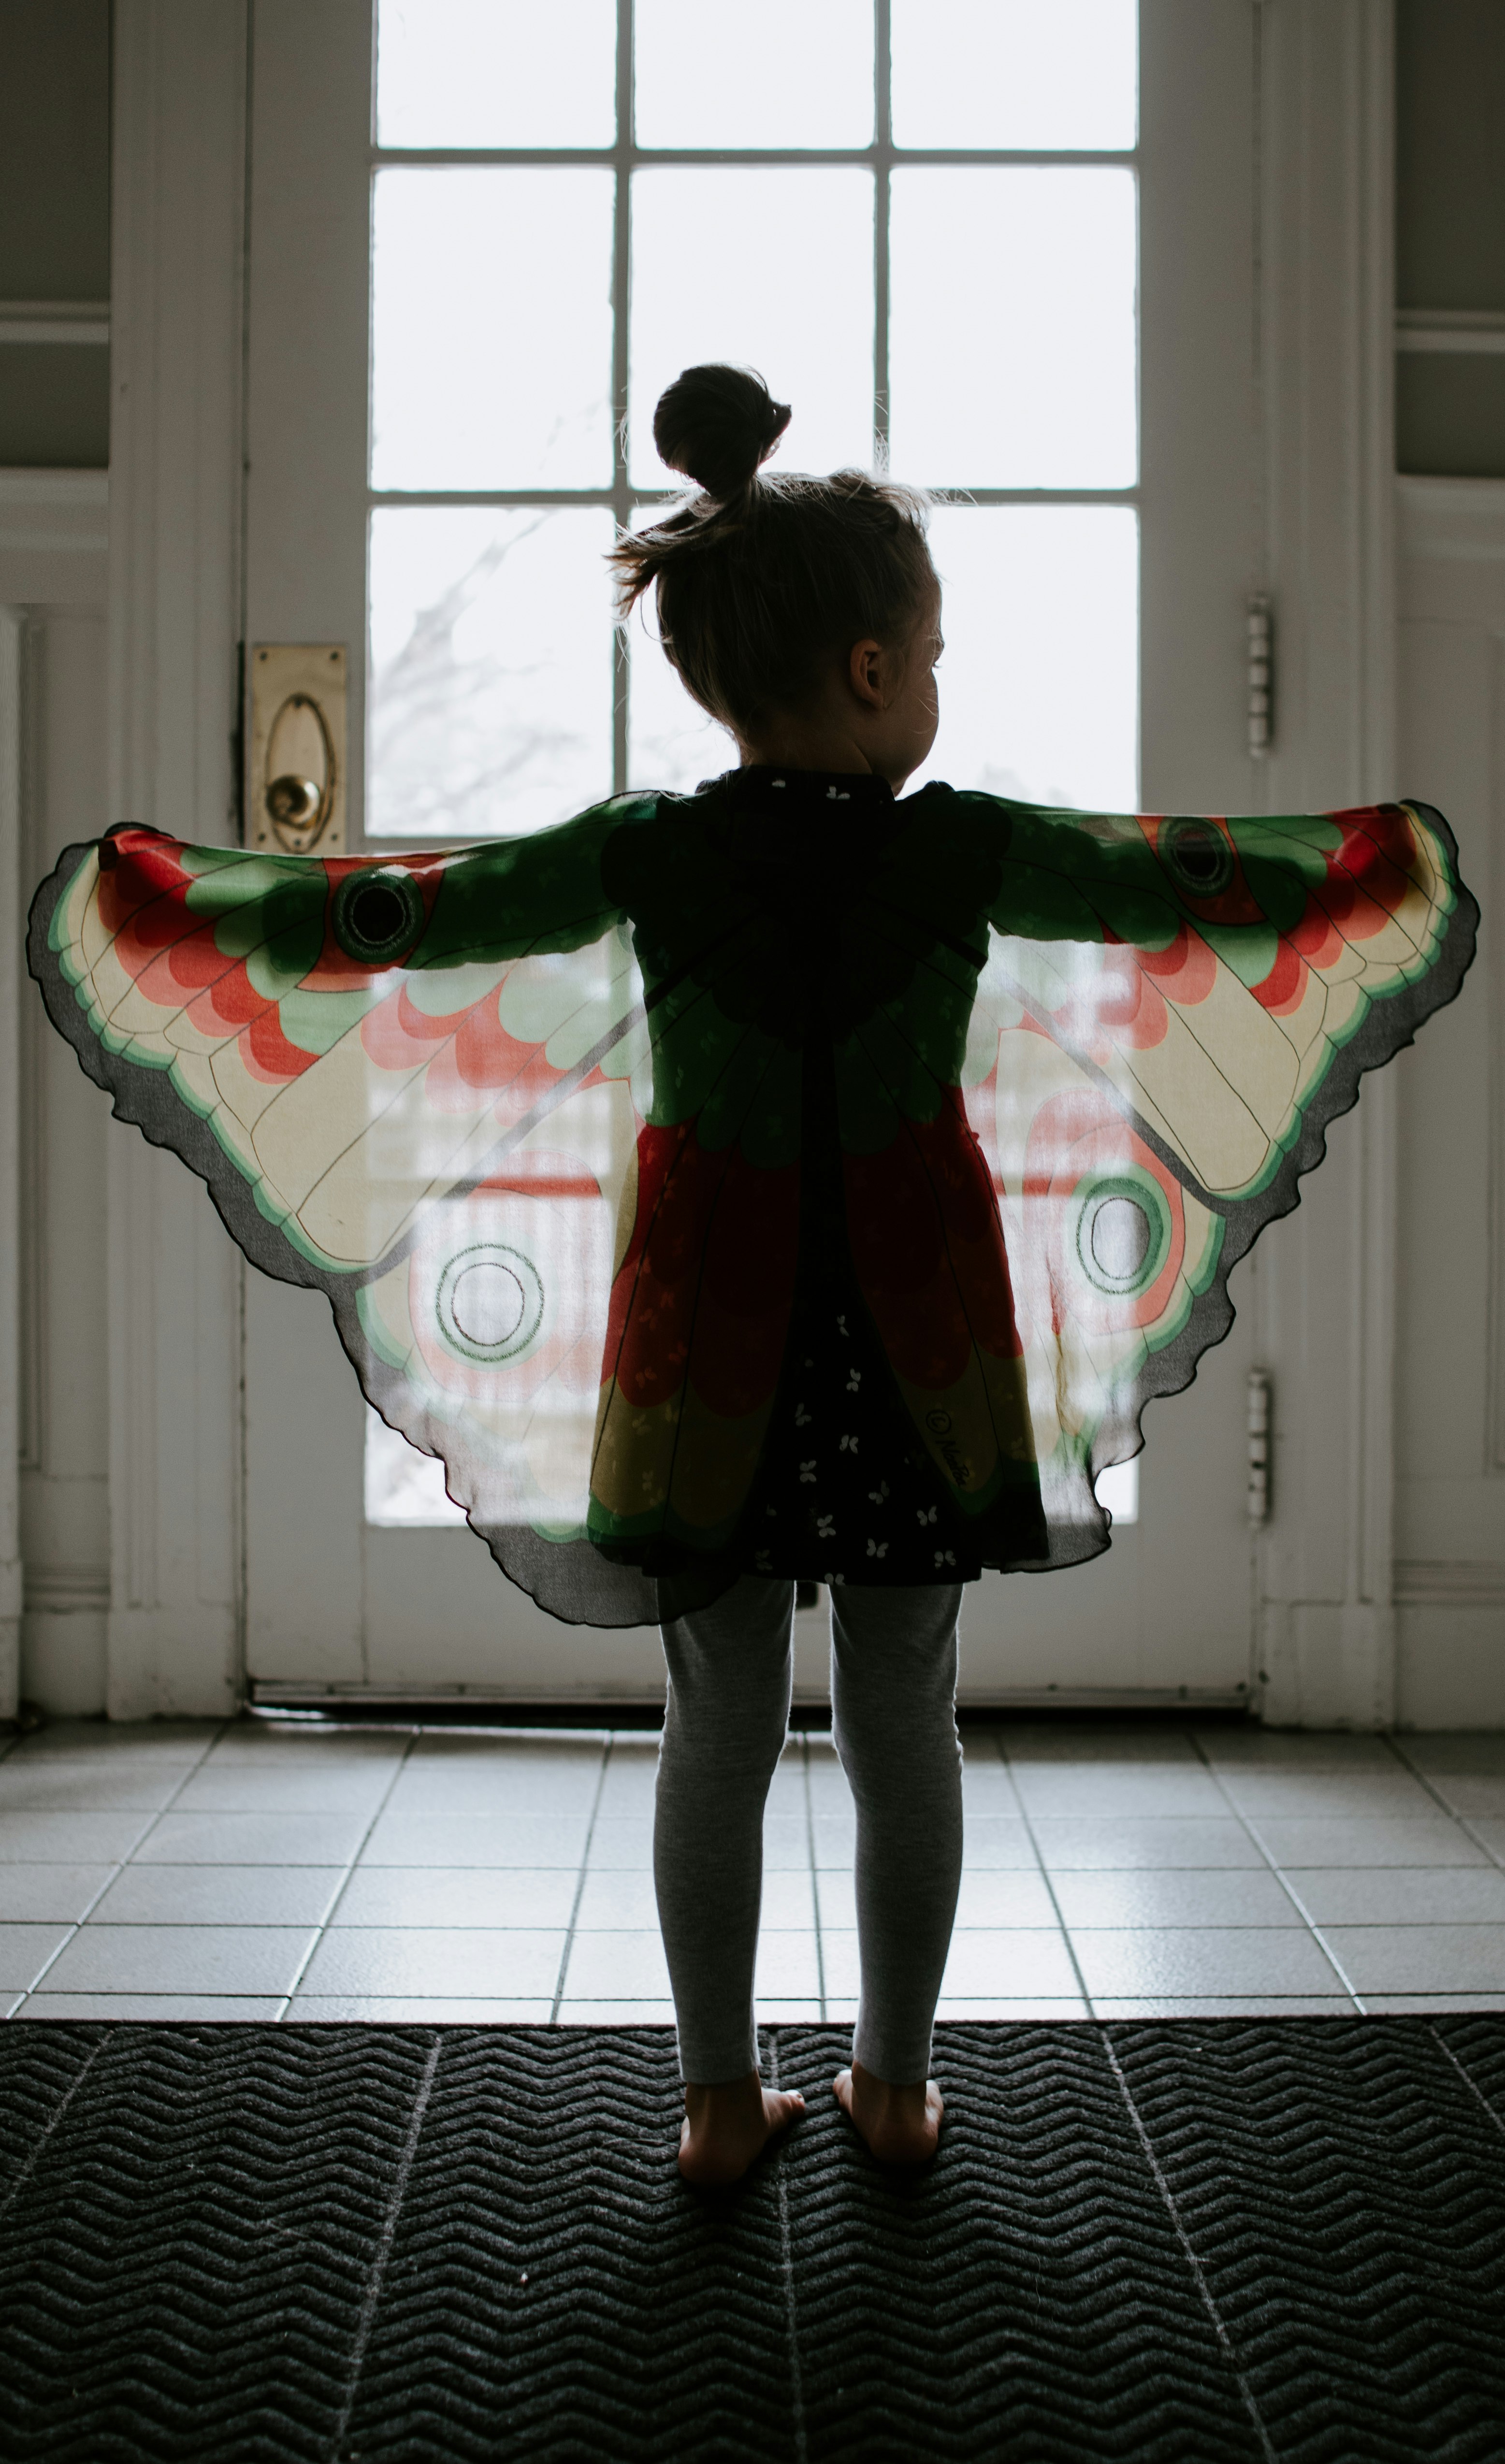 Little girl standing in a doorway with butterfly wings